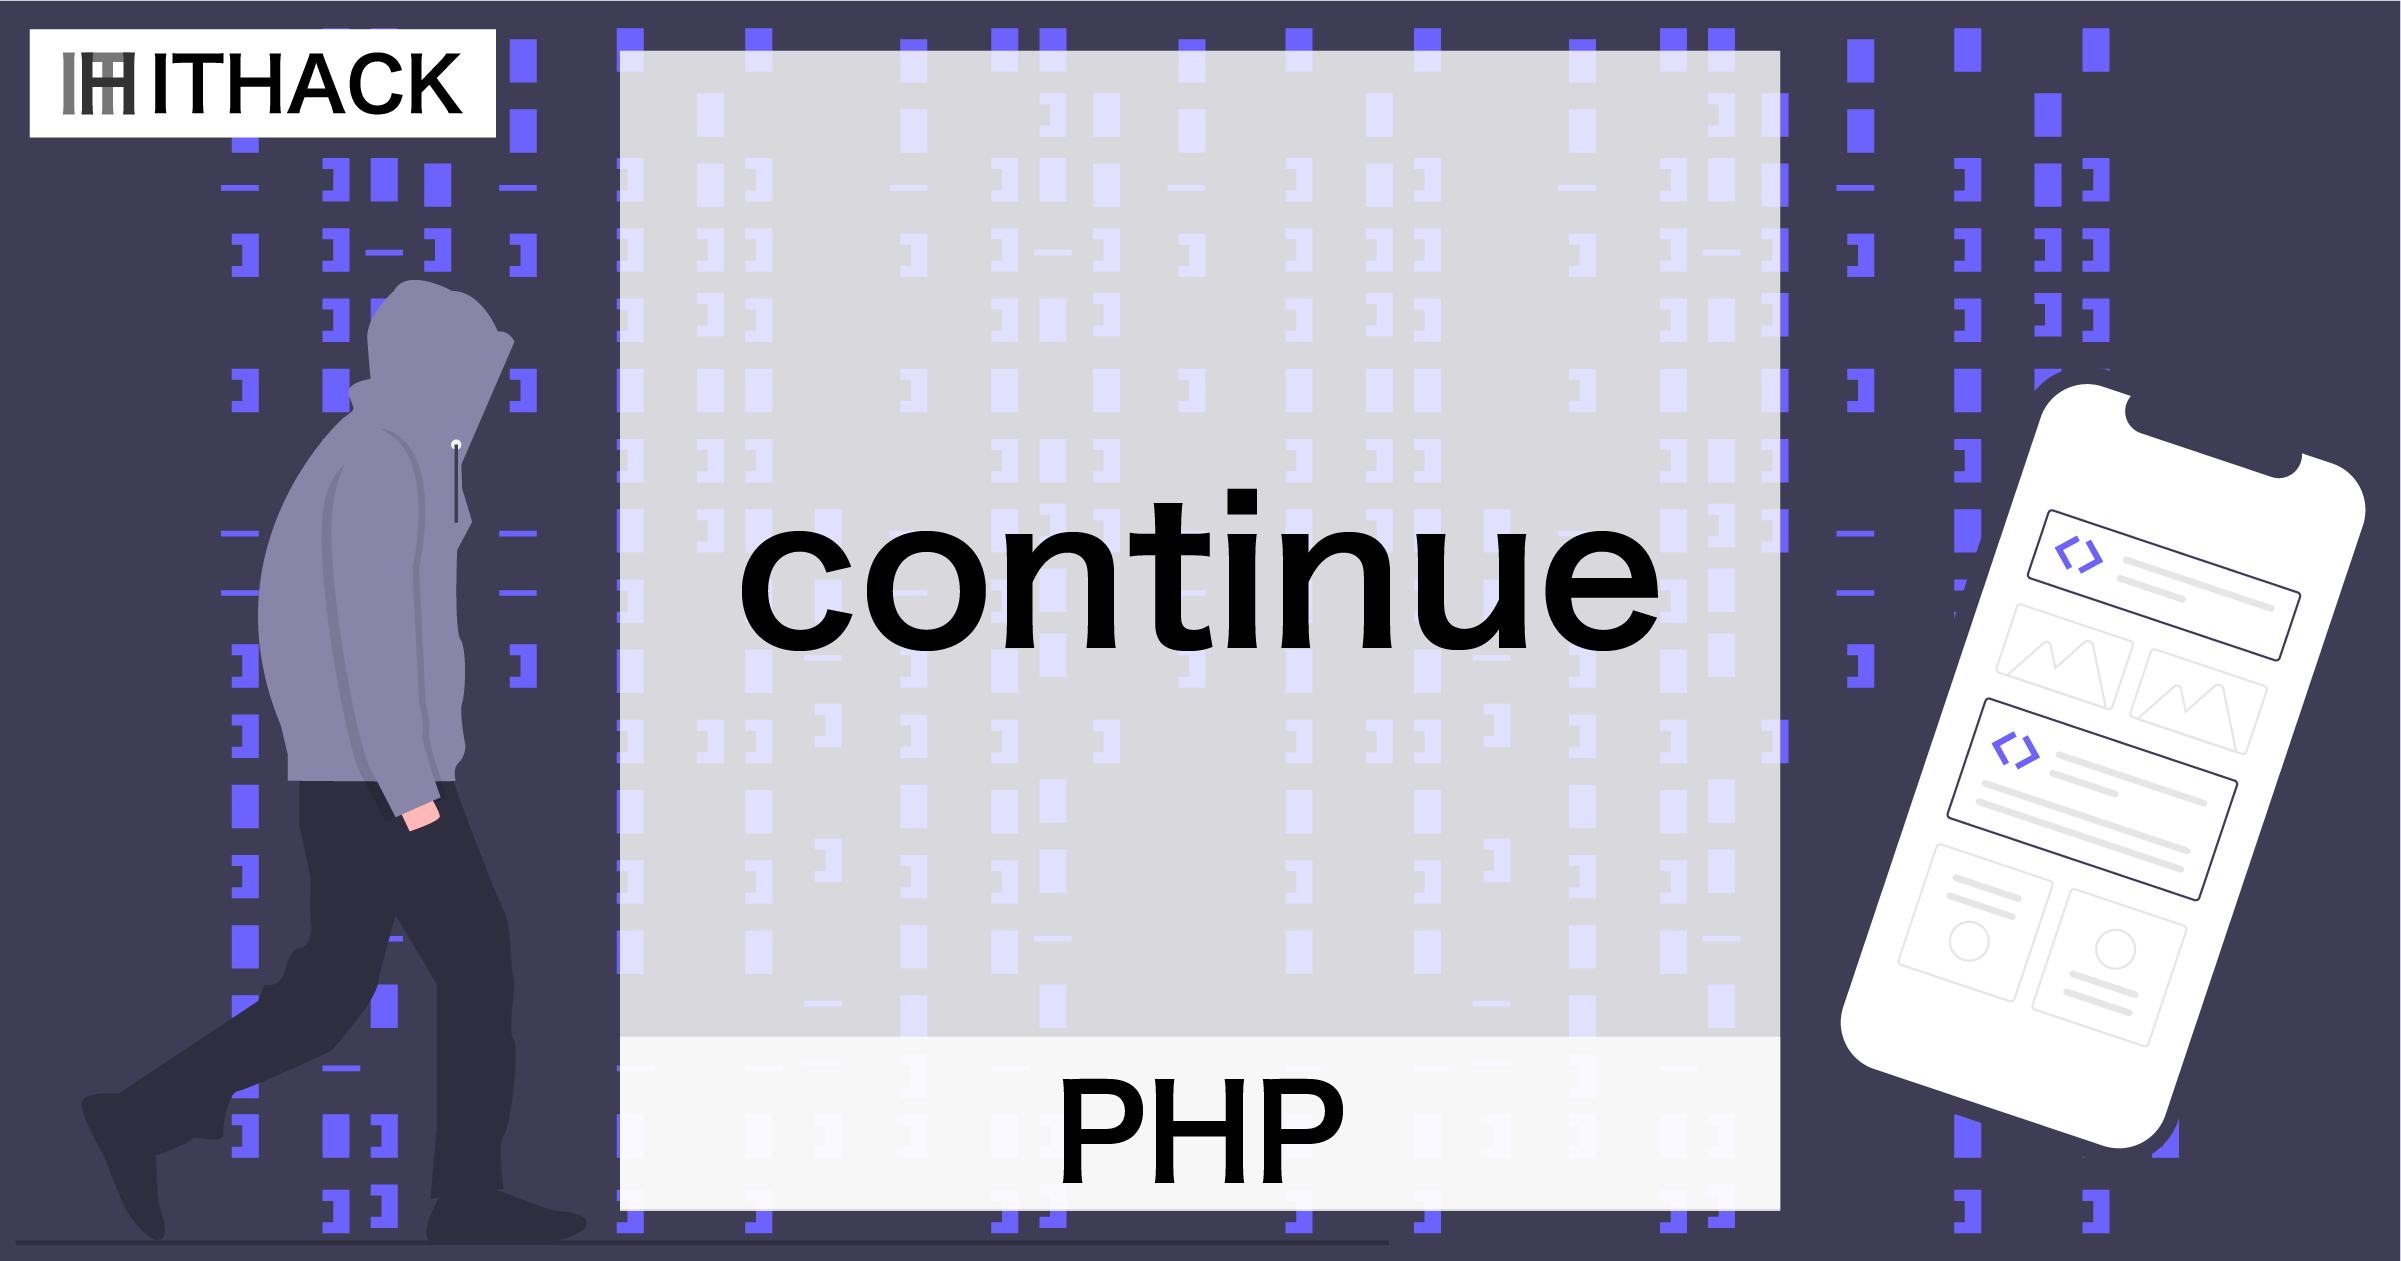 【PHP】continue文 - 反復処理のスキップ（for/foreach/while/do-while）